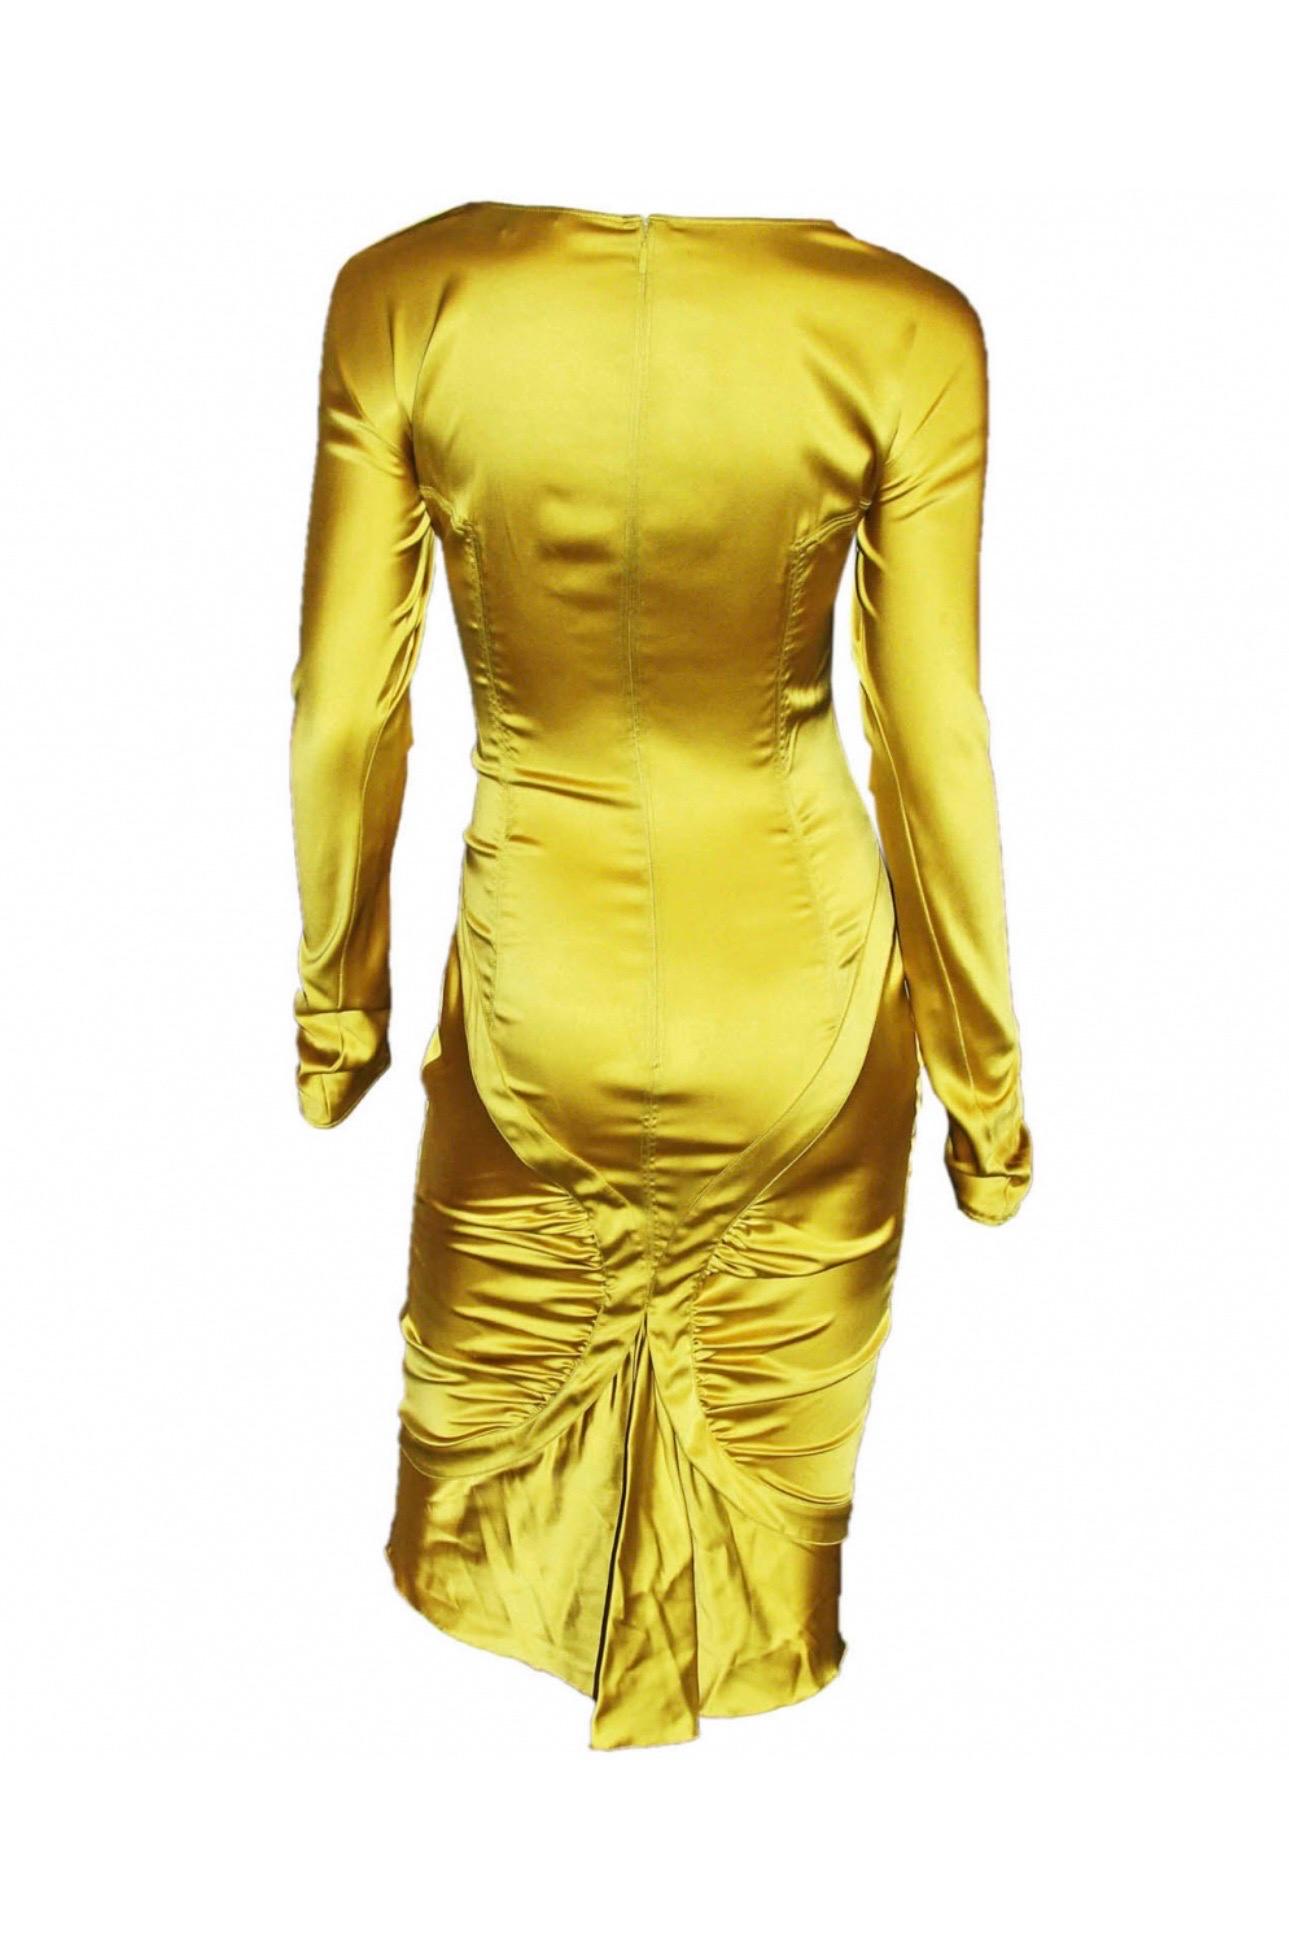 Tom Ford for Gucci F/W 2003 Runway Bodycon Silk Mustard Yellow Midi Dress IT 40

Look 8 from the Fall 2003 Collection.
